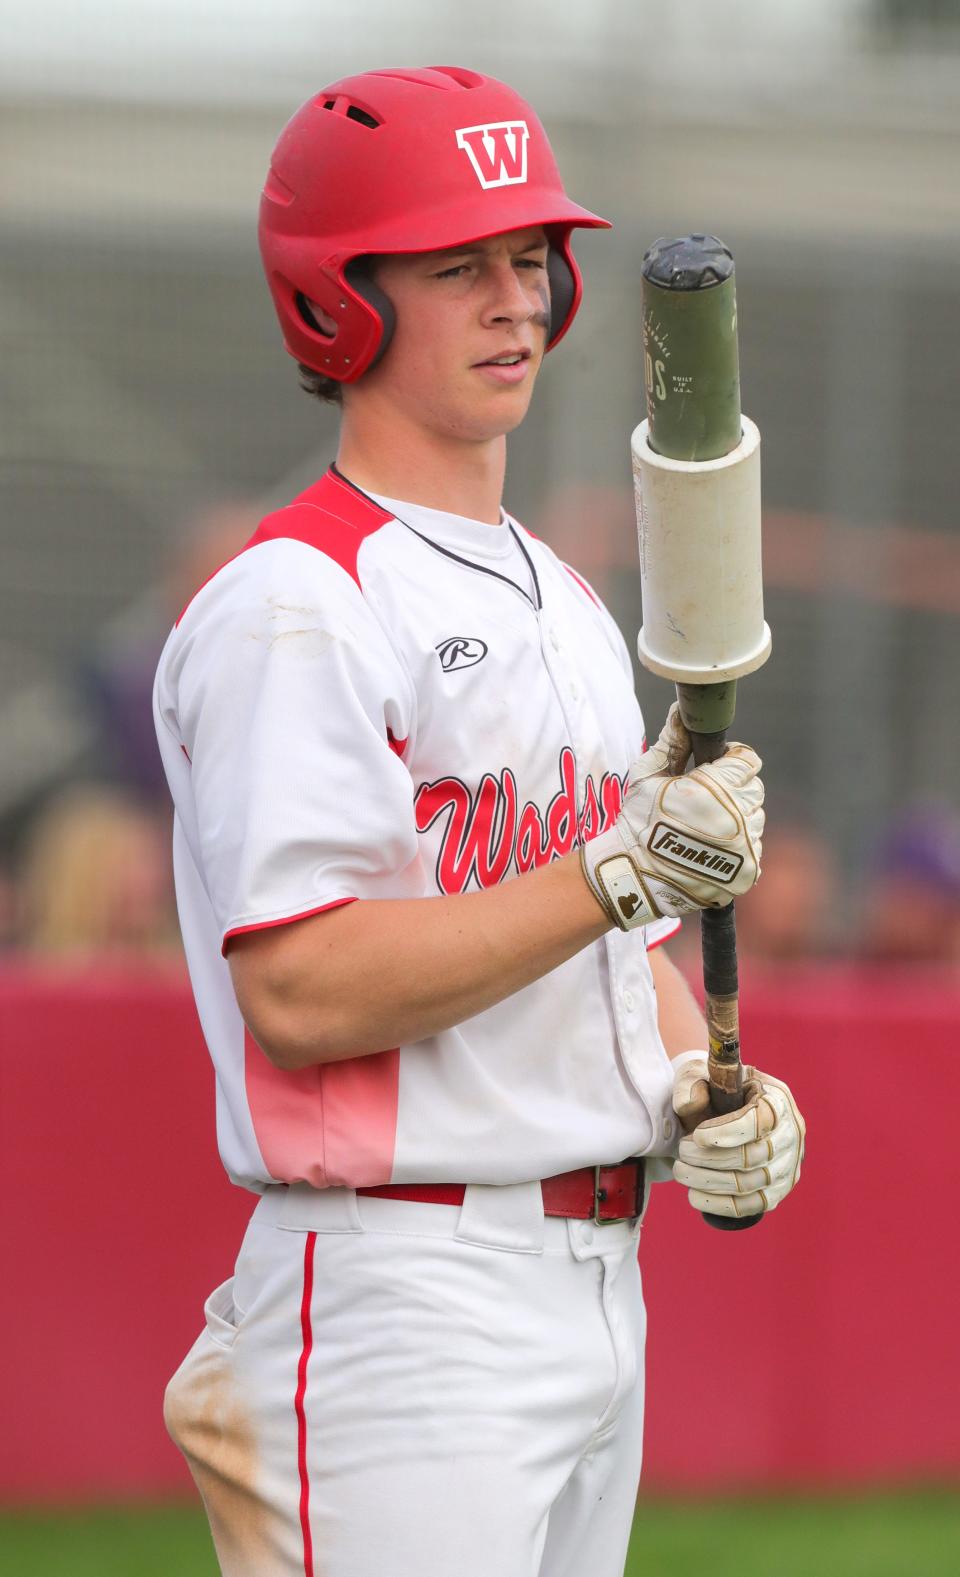 Wadsworth leadoff hitter Aaron Keating is one of the best five-tool players Grizzlies coach Greg Pickard said he has had in his tenure at the school.